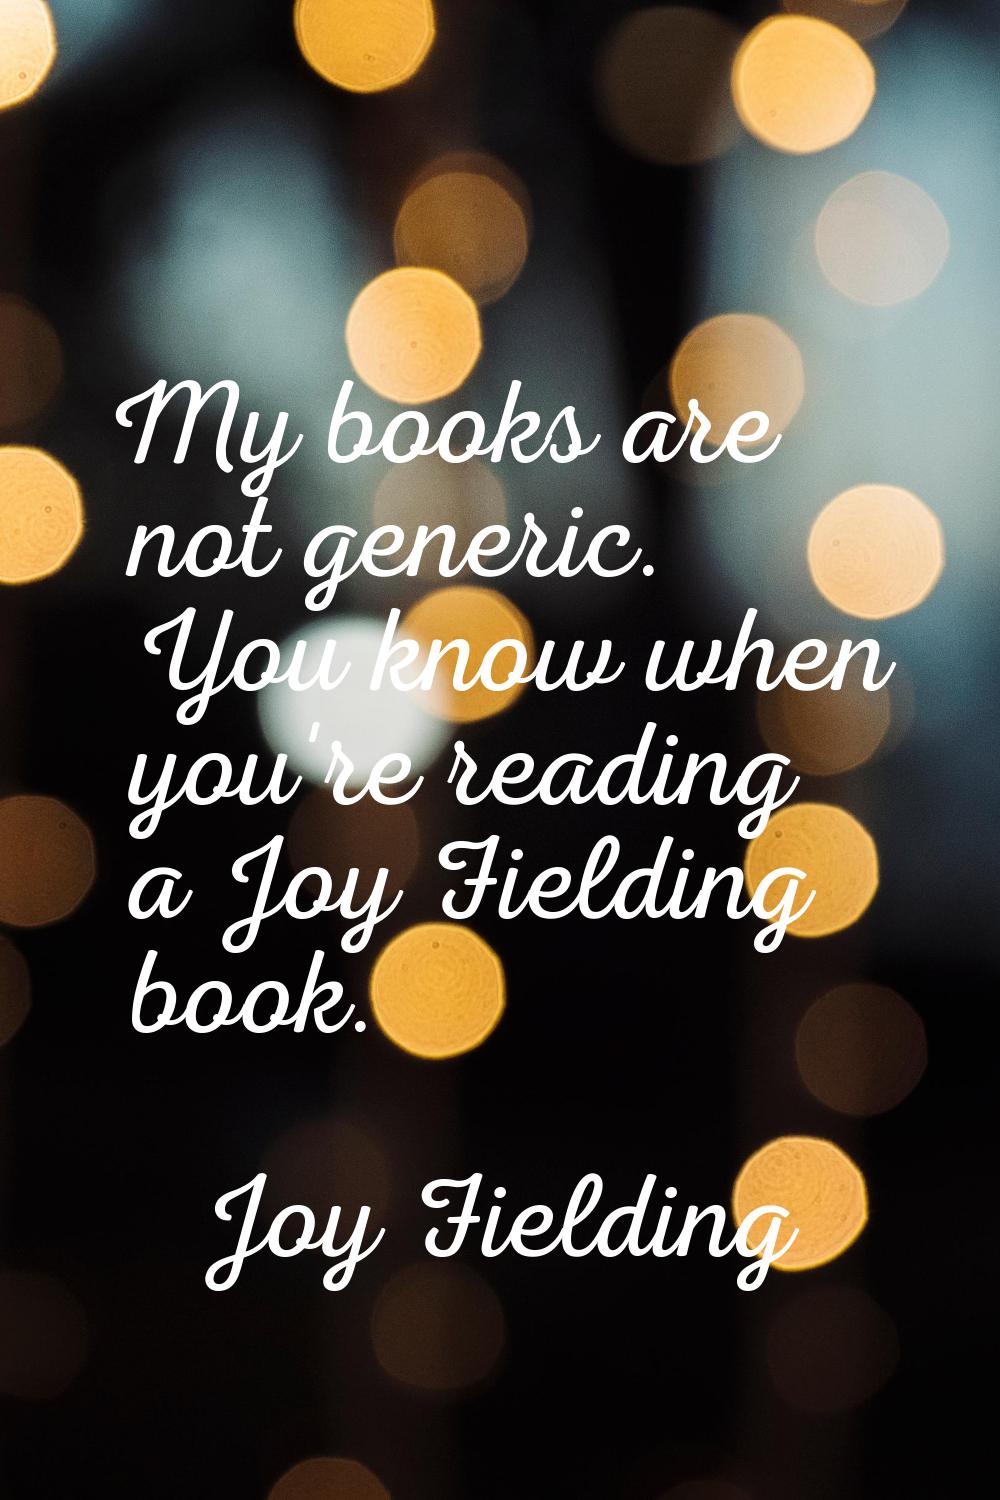 My books are not generic. You know when you're reading a Joy Fielding book.